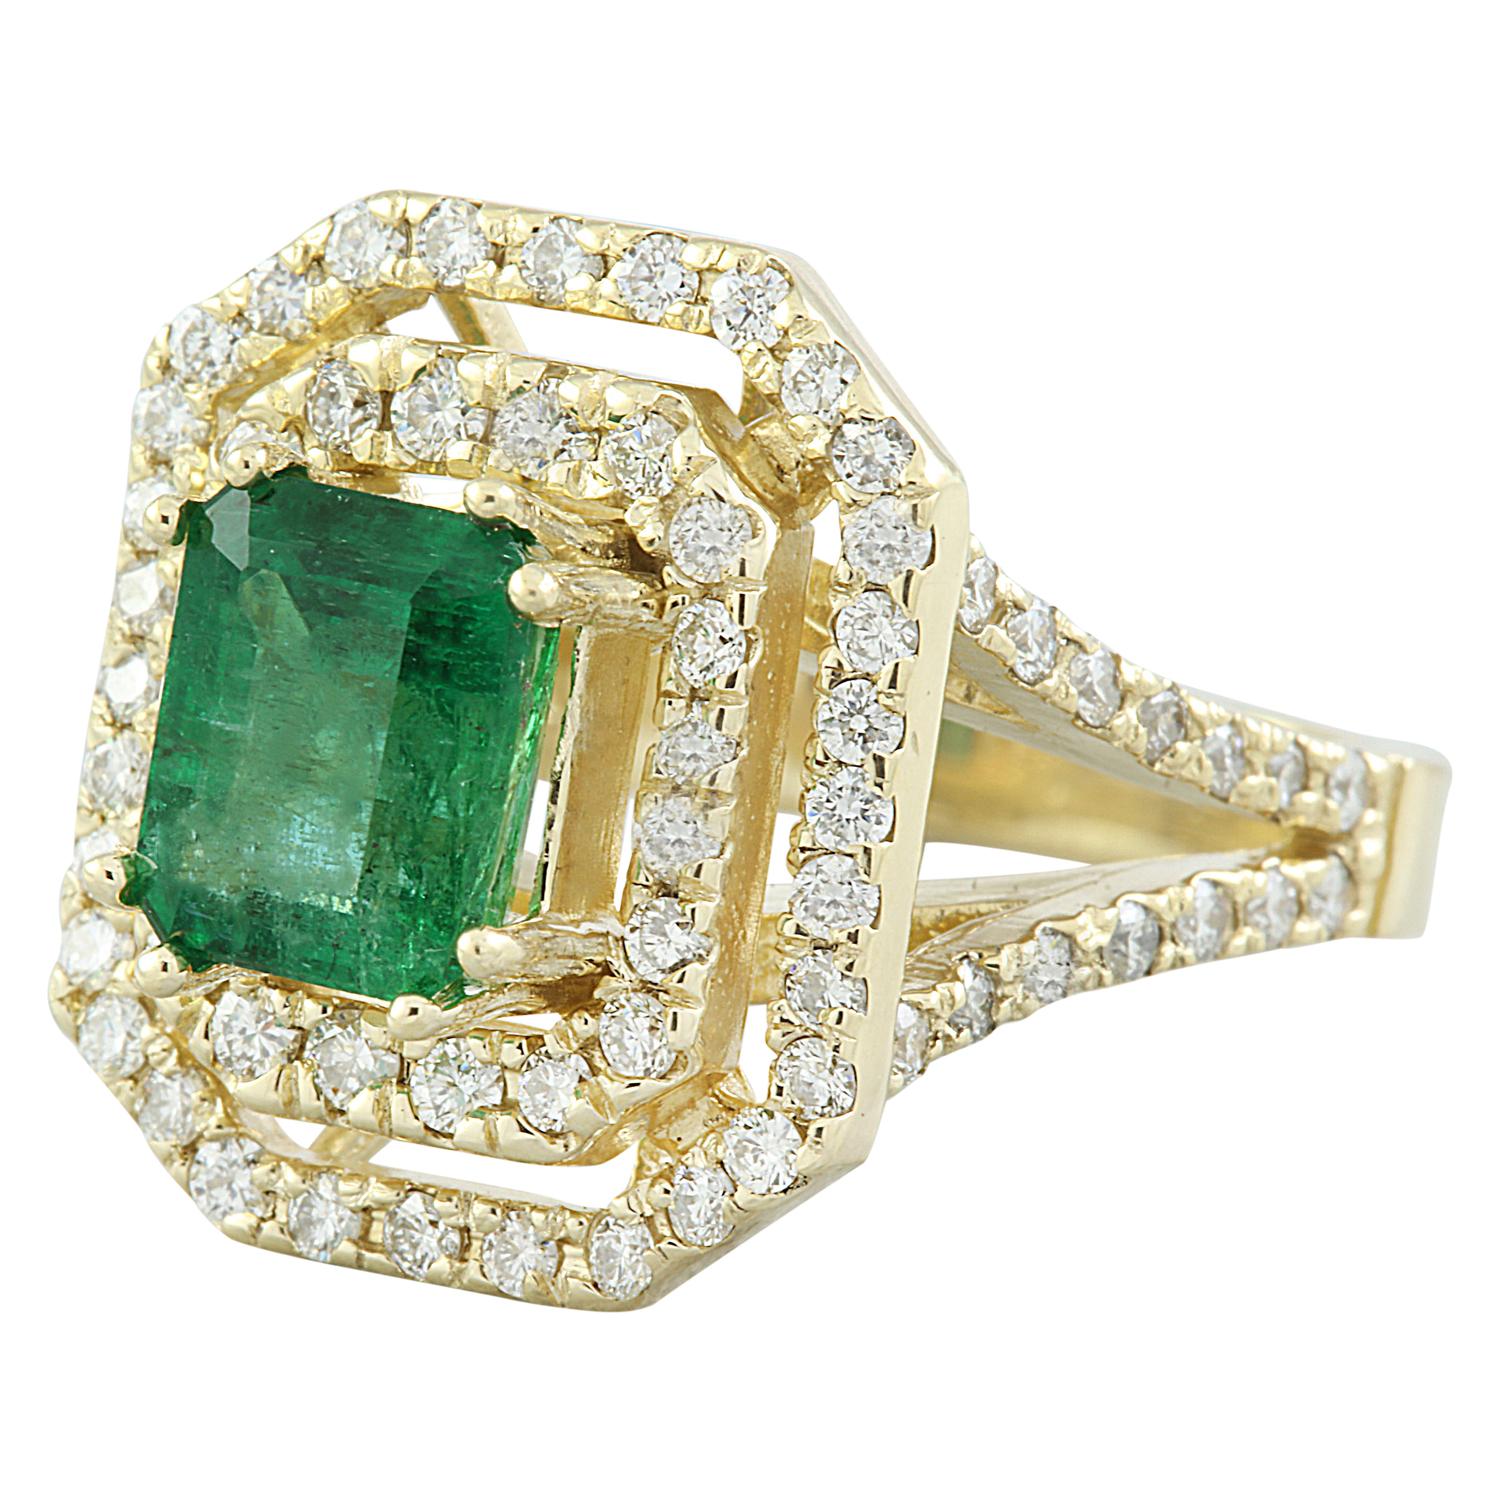 Introducing our elegant 3.25 Carat Natural Emerald 14K Solid Yellow Gold Diamond Ring. This ring features a stamped 14K mark and weighs 9.3 grams, ensuring both quality and durability. The focal point is a natural Emerald gemstone weighing 2.24